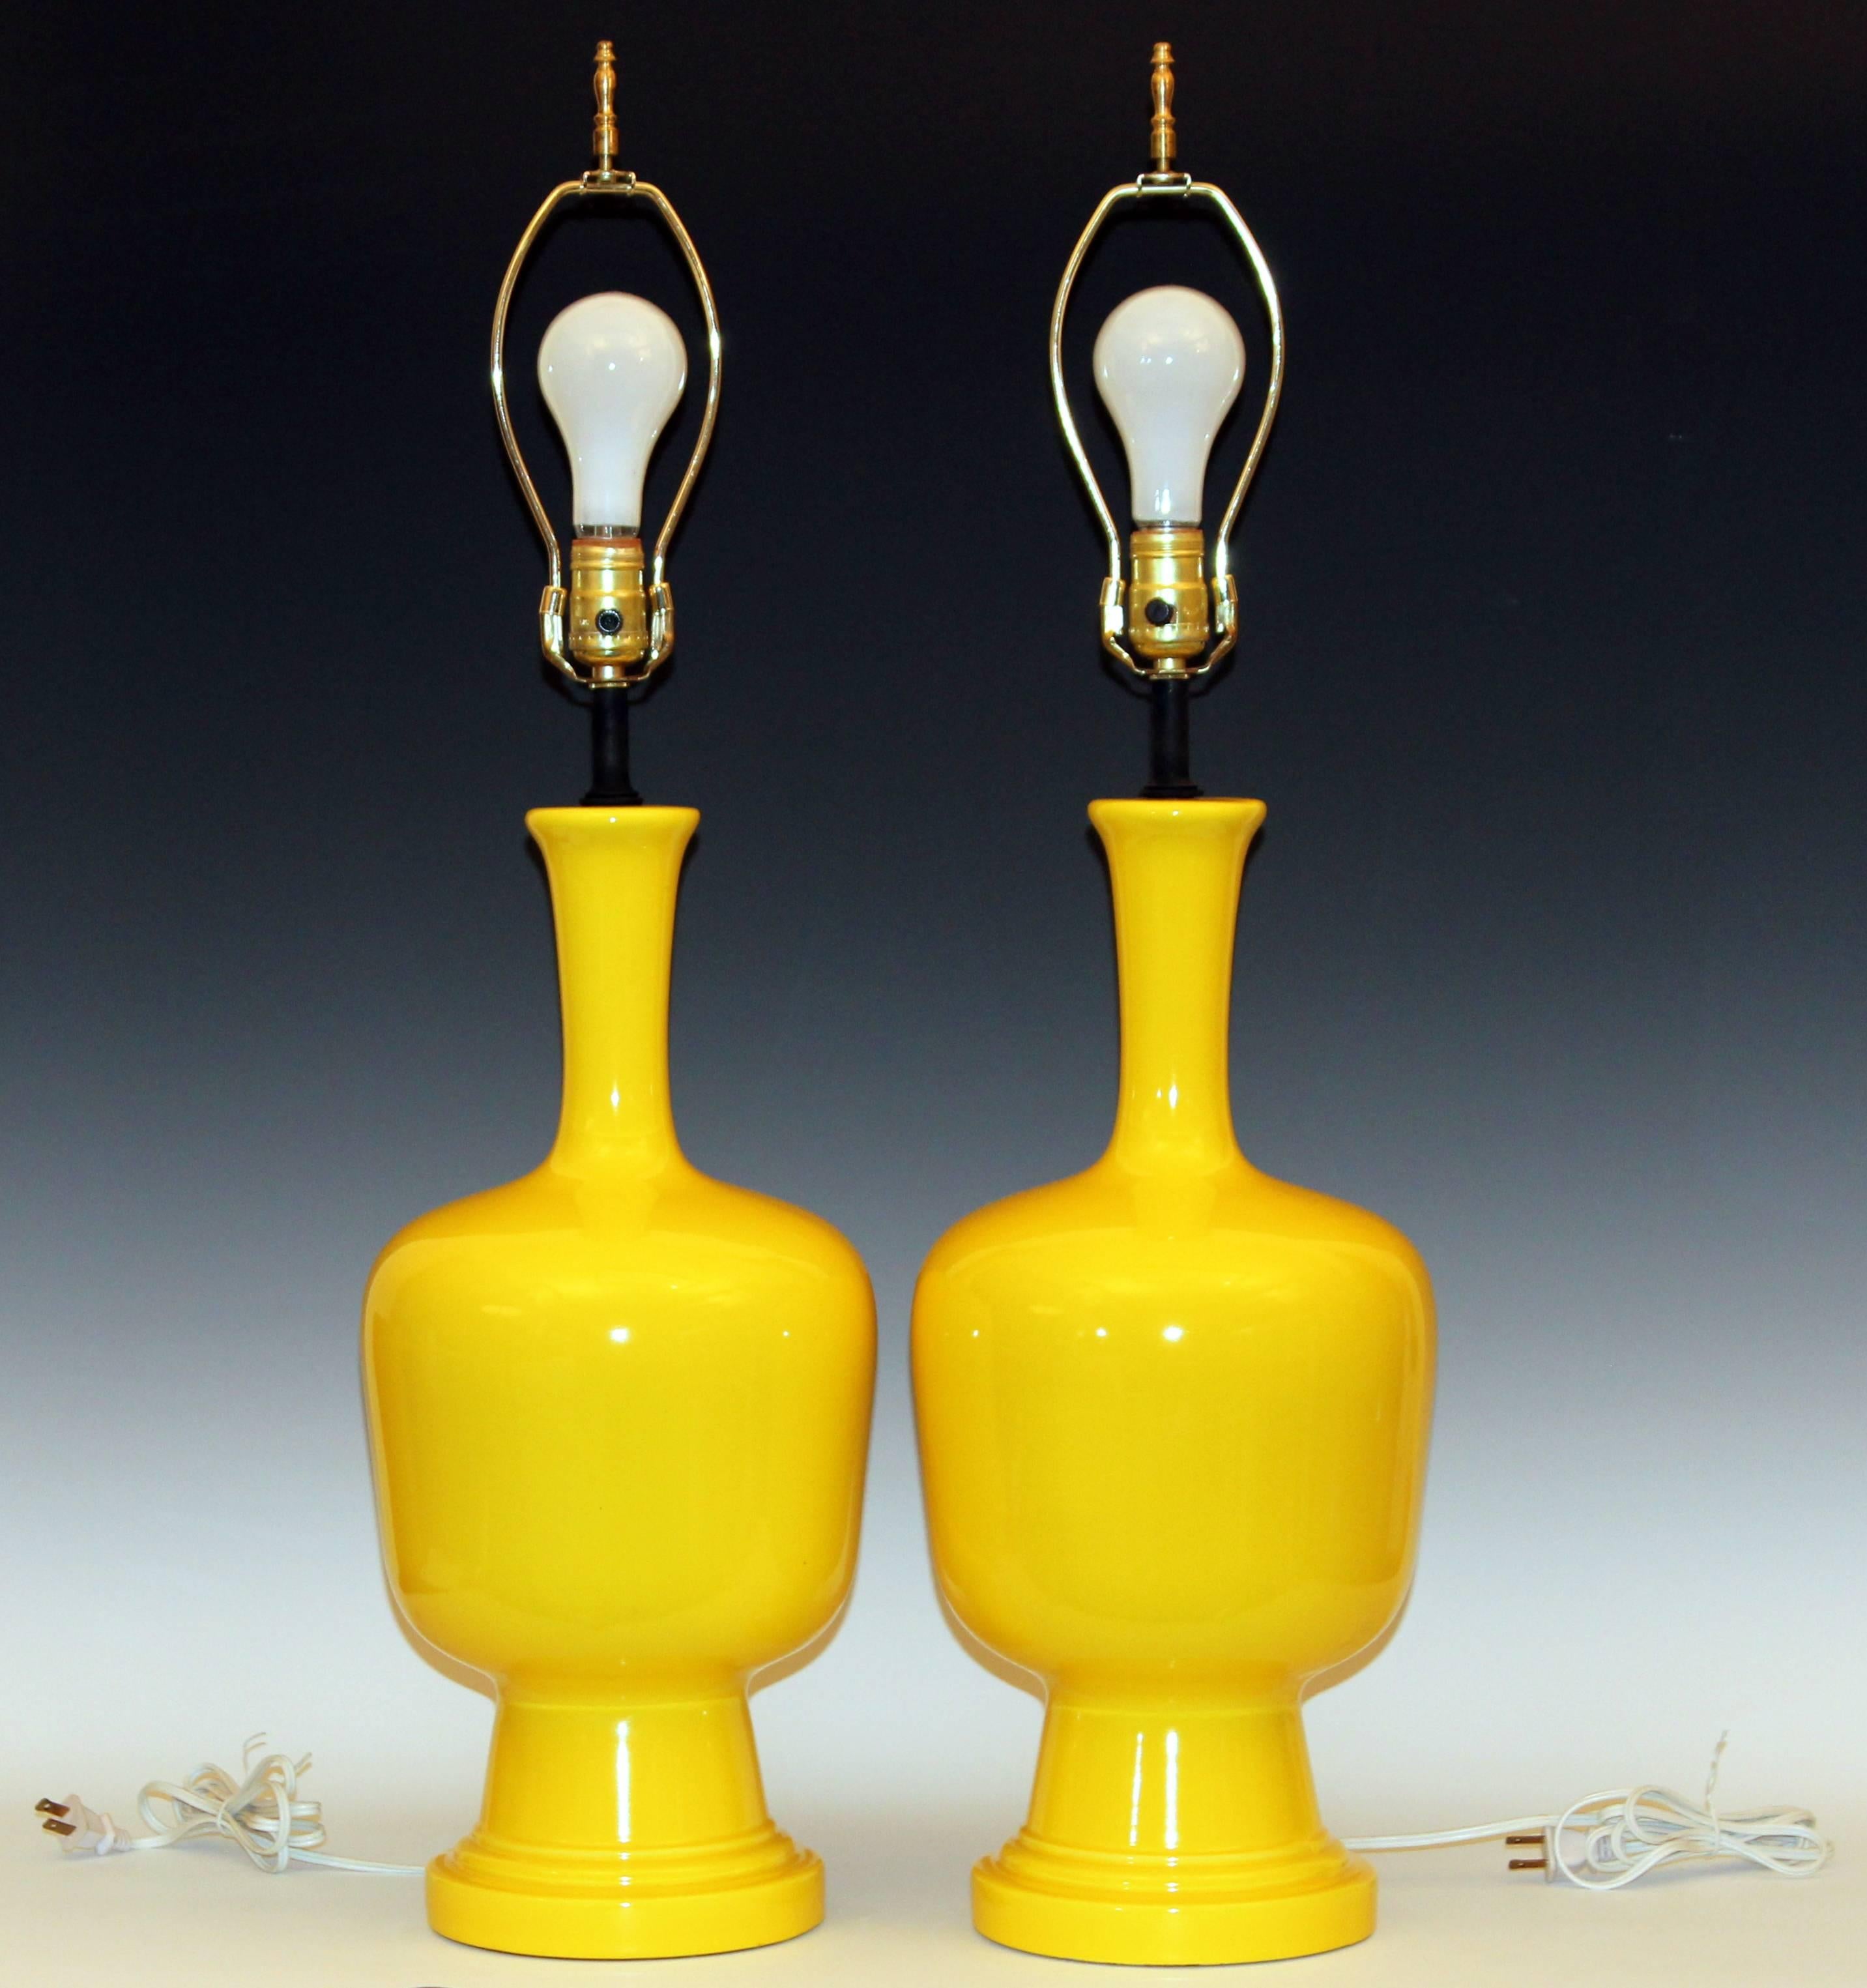 Pair of vintage pottery lamps in pleasant organic form and bright yellow glaze, circa 1970. Sure to brighten or cheer up any room. New wiring, reconditioned hardware. Measures: 33" high overall, 20" to top of pottery, 9" diameter.